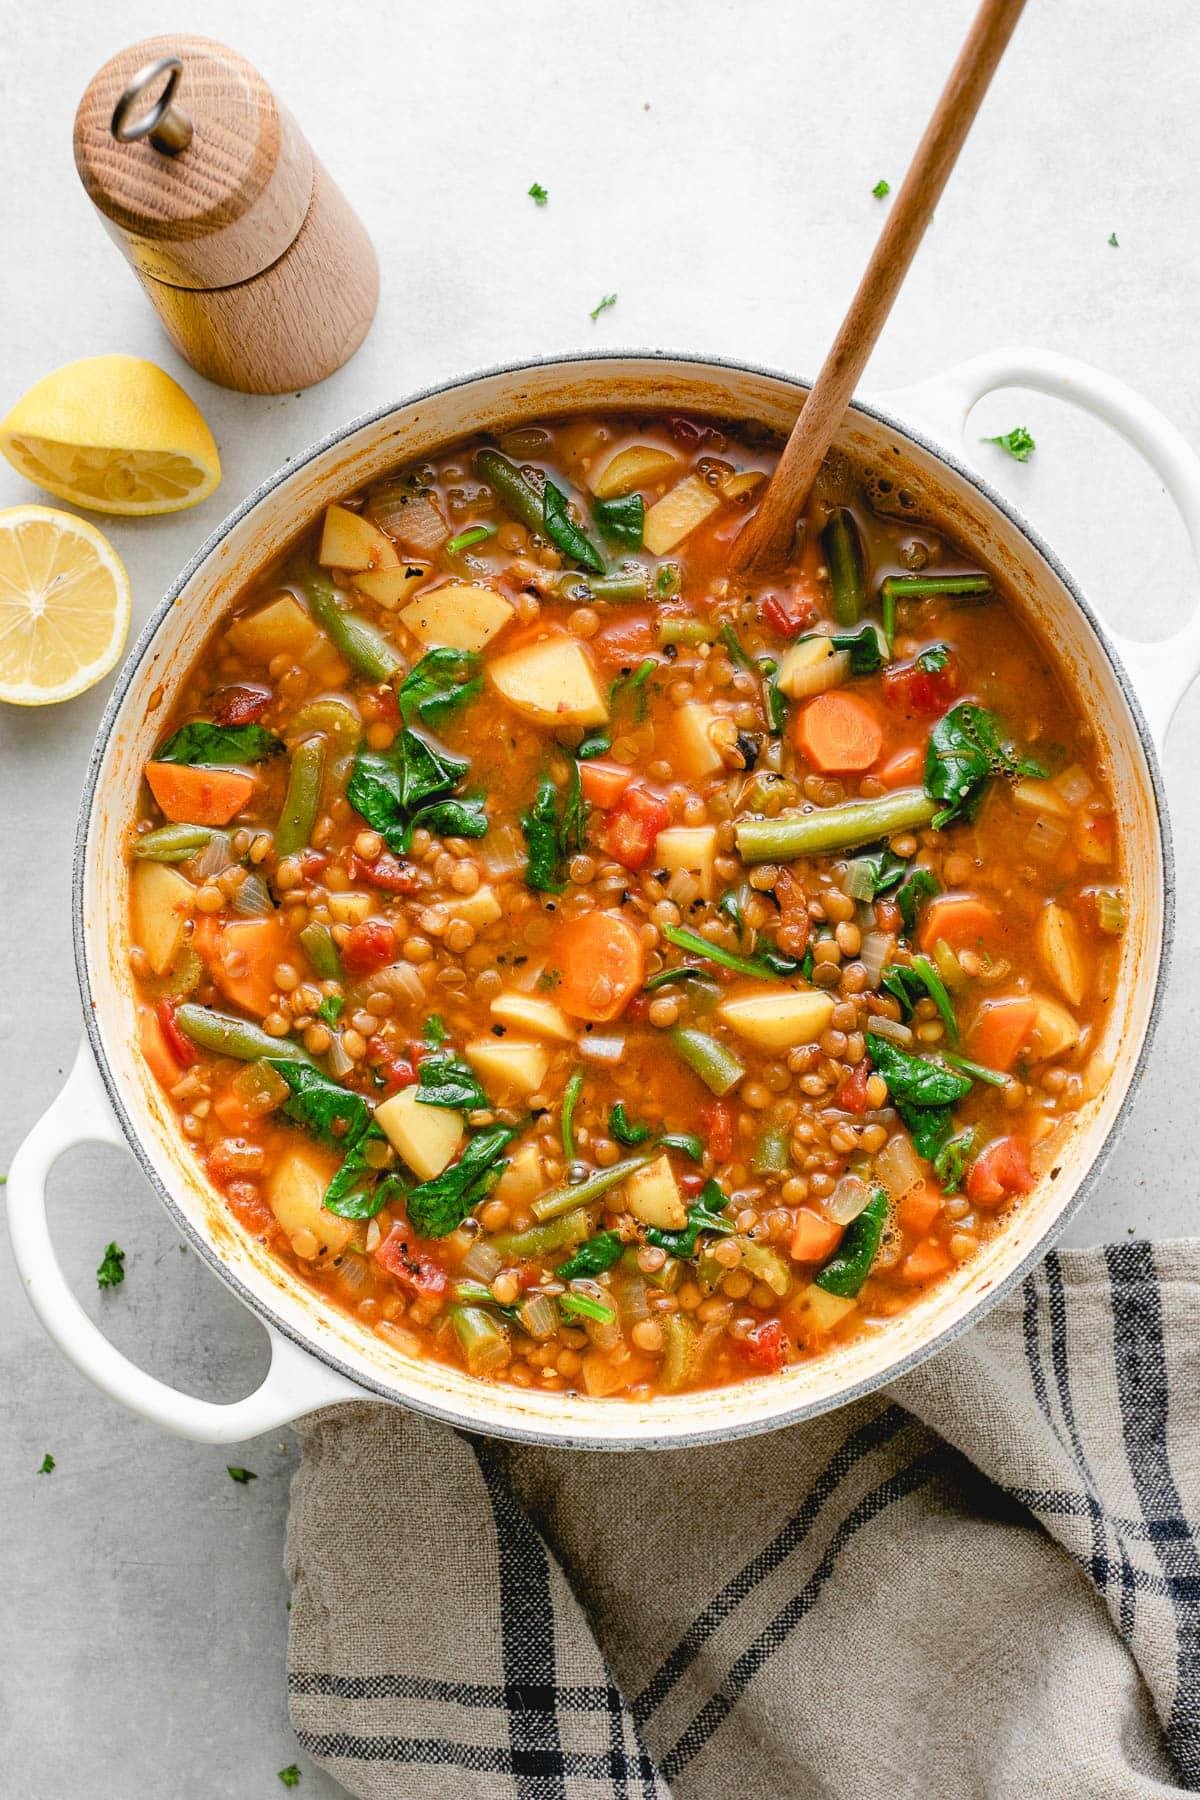 5-Ingredient Vegan Soup Recipe for a Cozy Night In